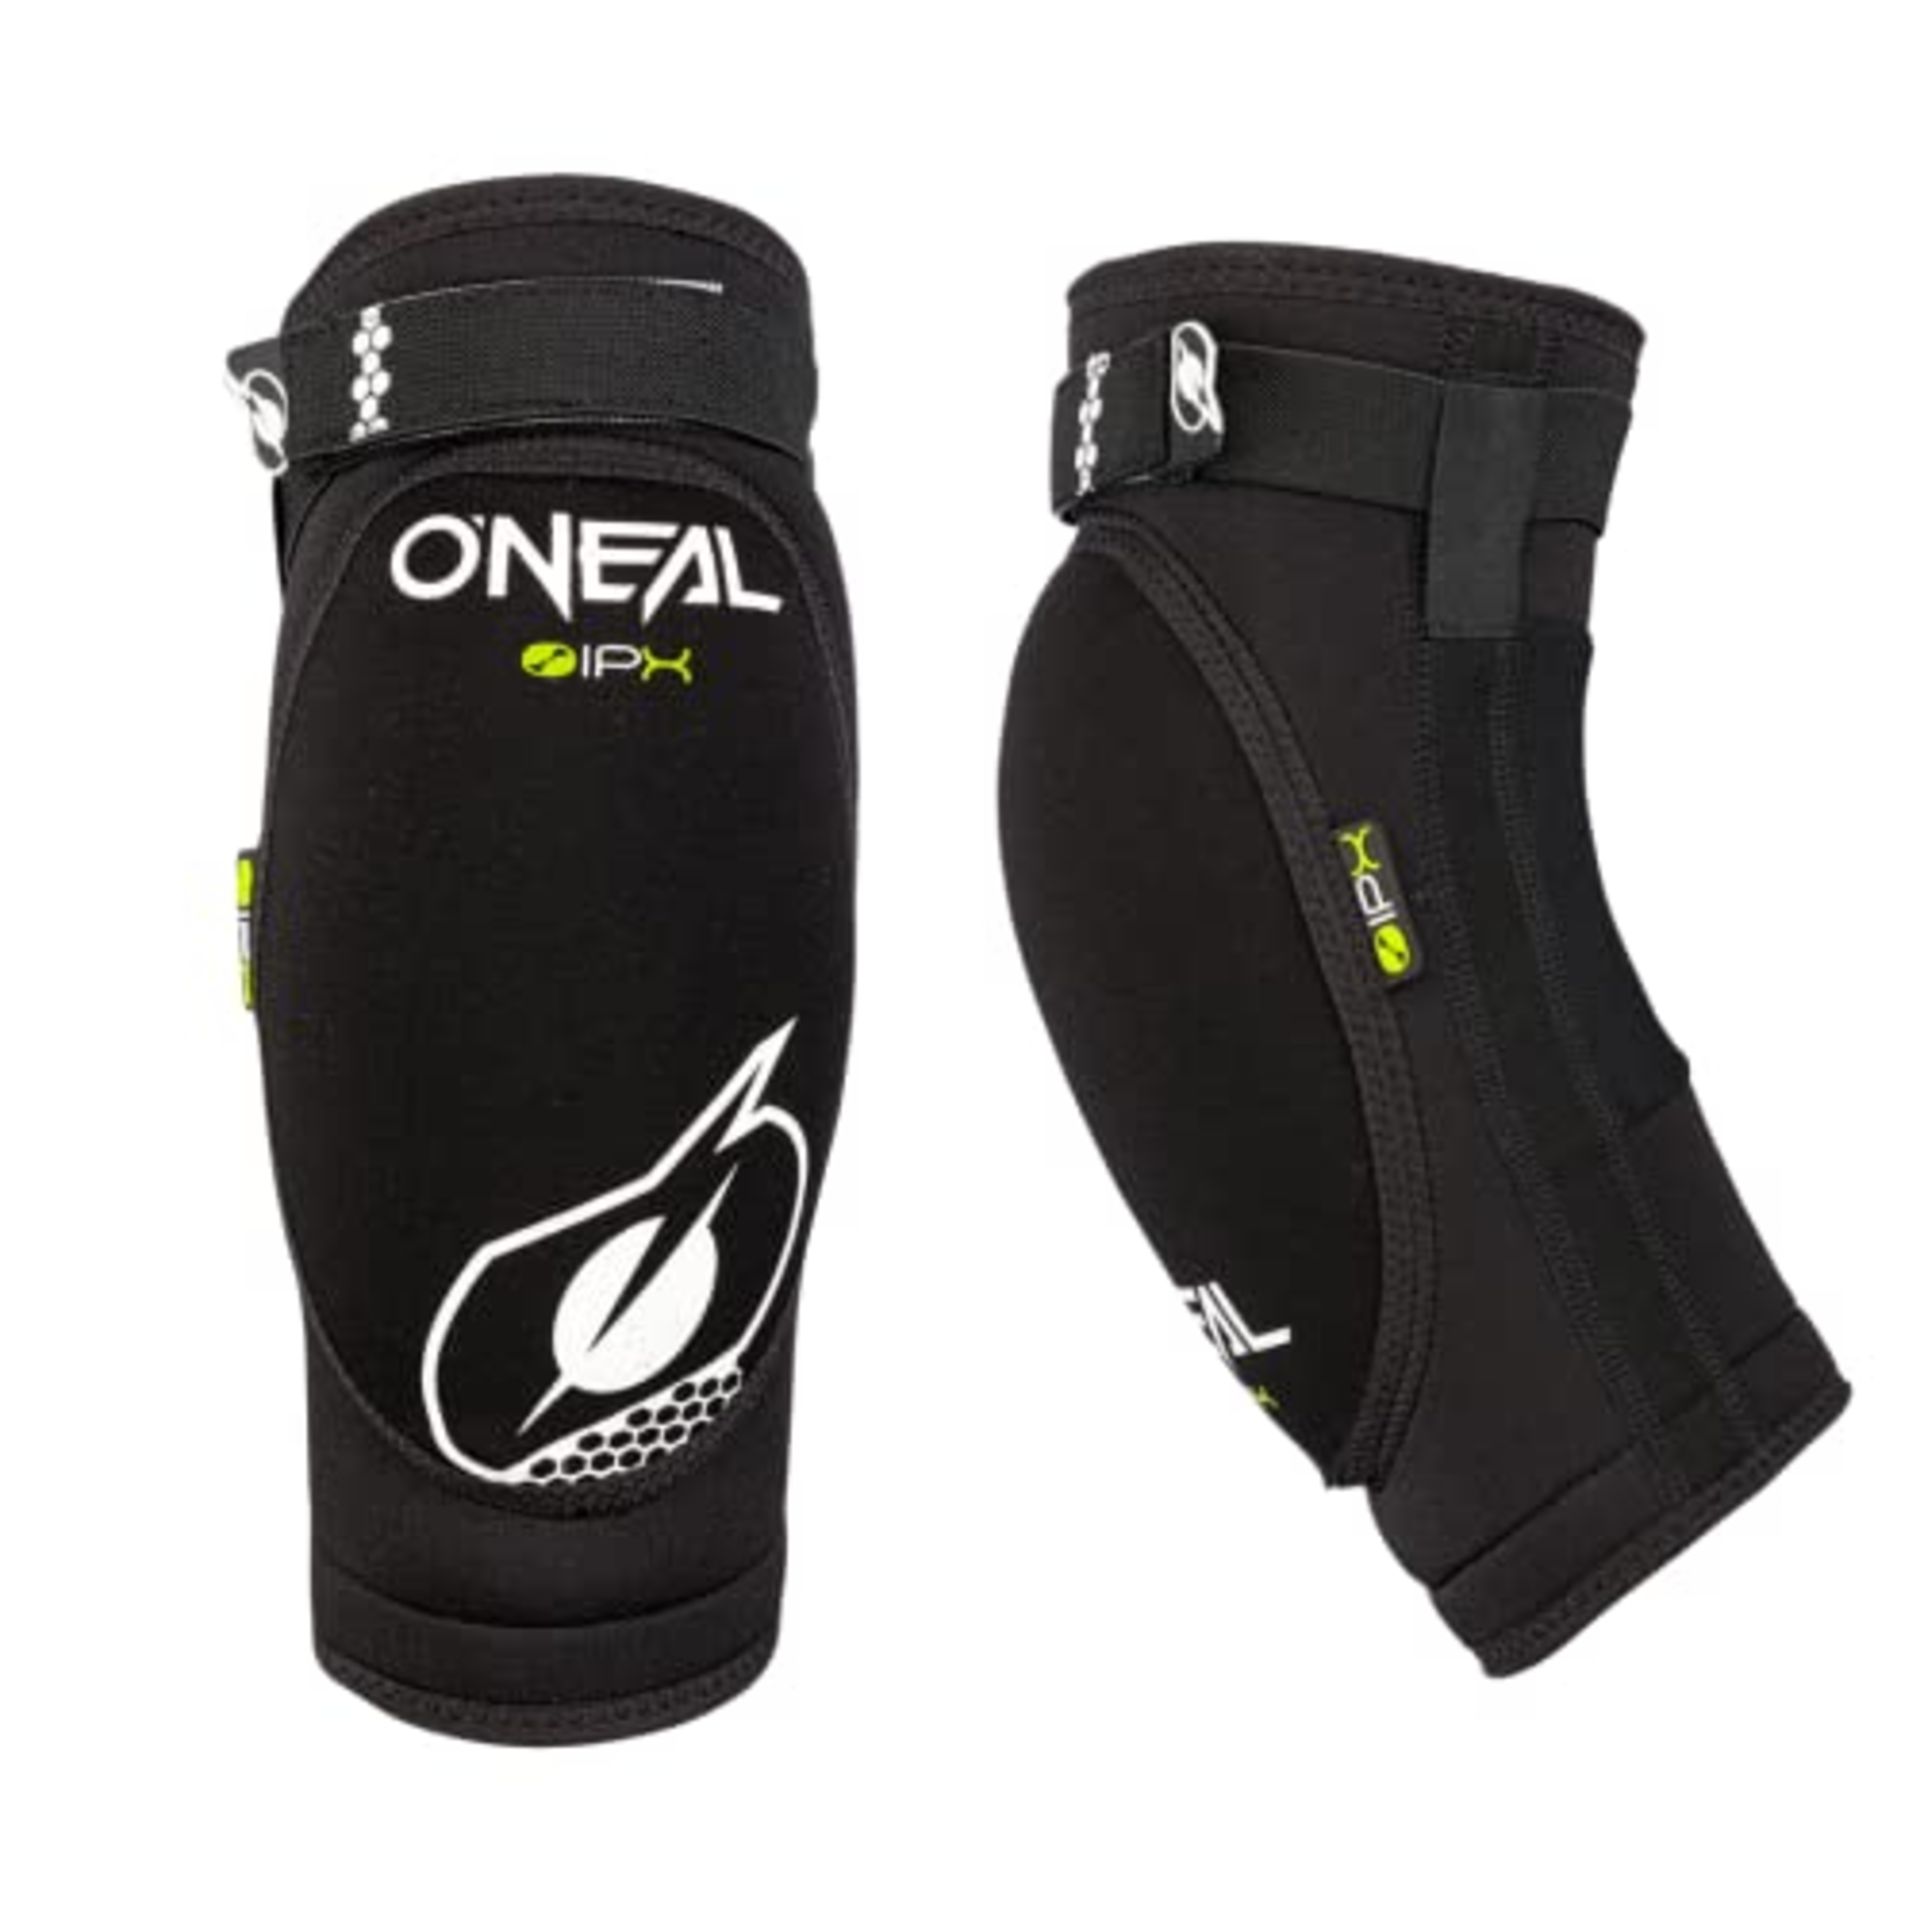 O'NEAL | Elbow Protector | BMX Mountain Bike Downhill | Breathable Neoprene, Lightweight and Ultra-